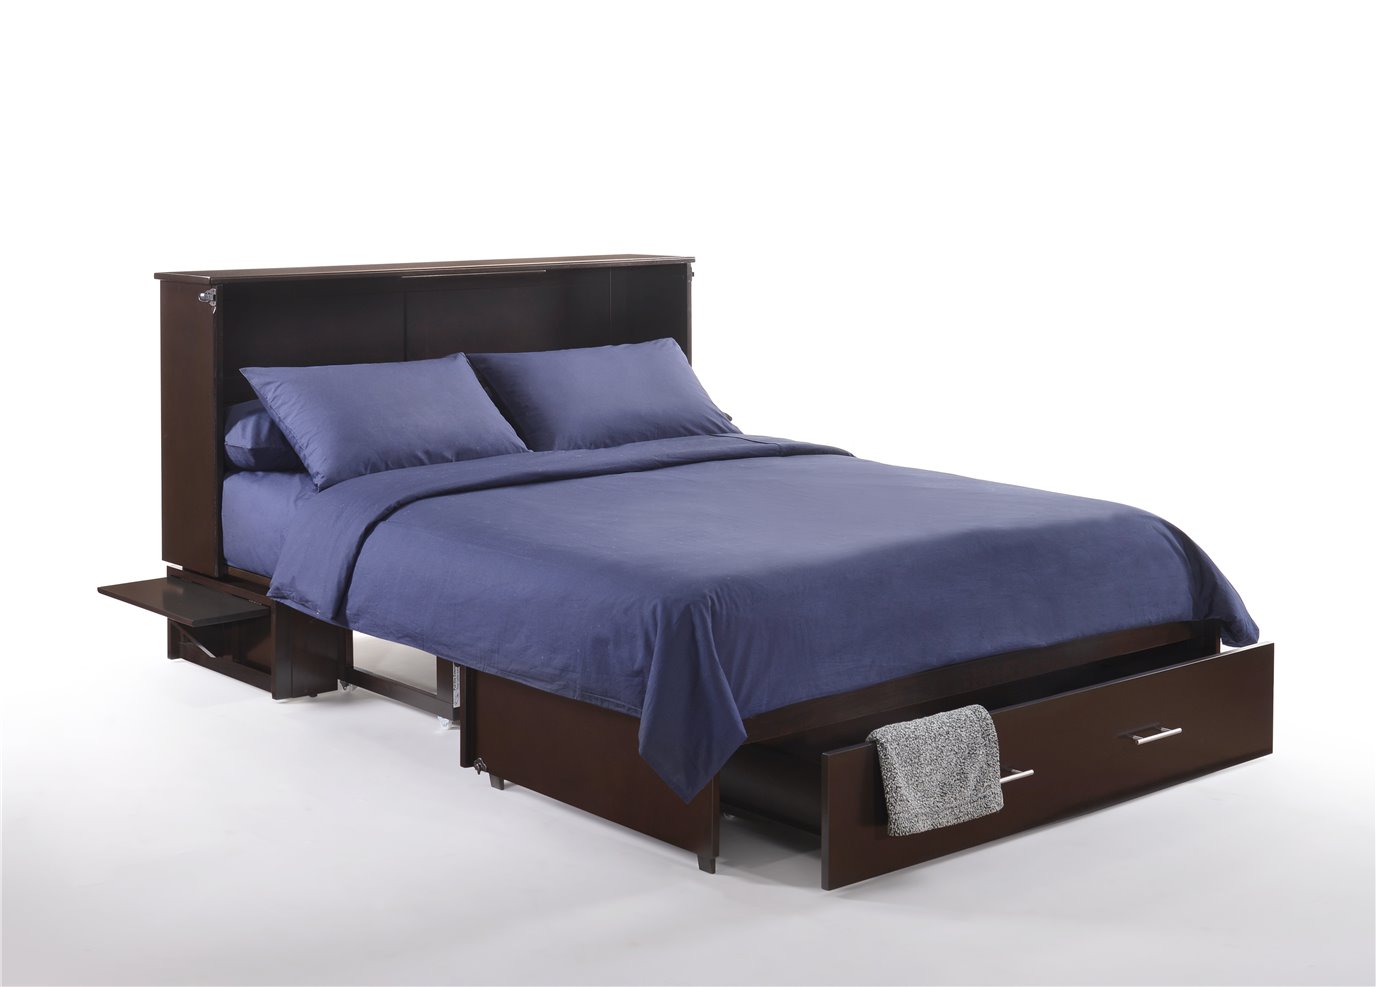 Sagebrush Murphy Cabinet Bed in in Chocolate Finish with Queen Mattress